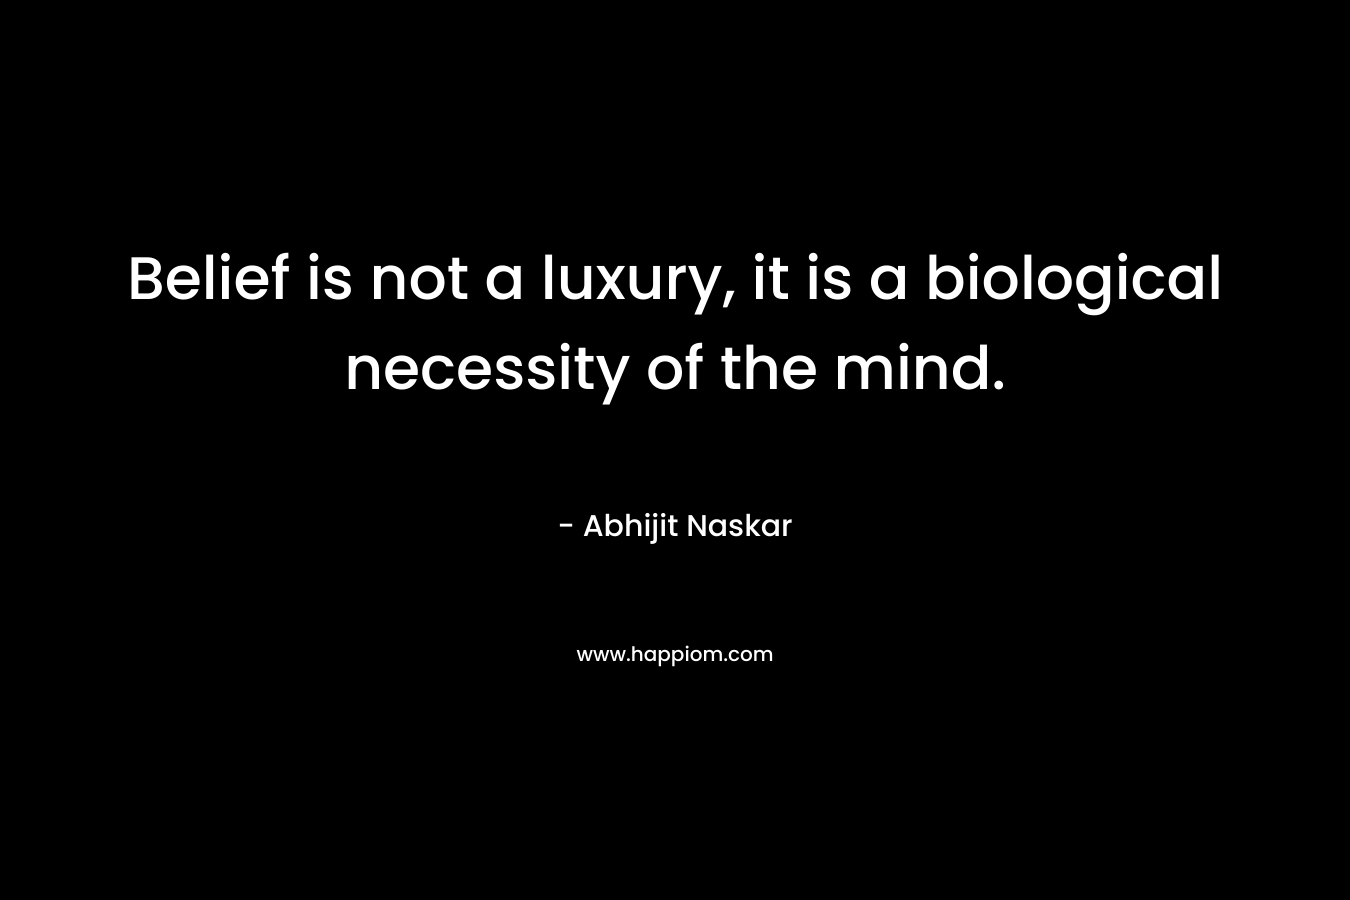 Belief is not a luxury, it is a biological necessity of the mind.